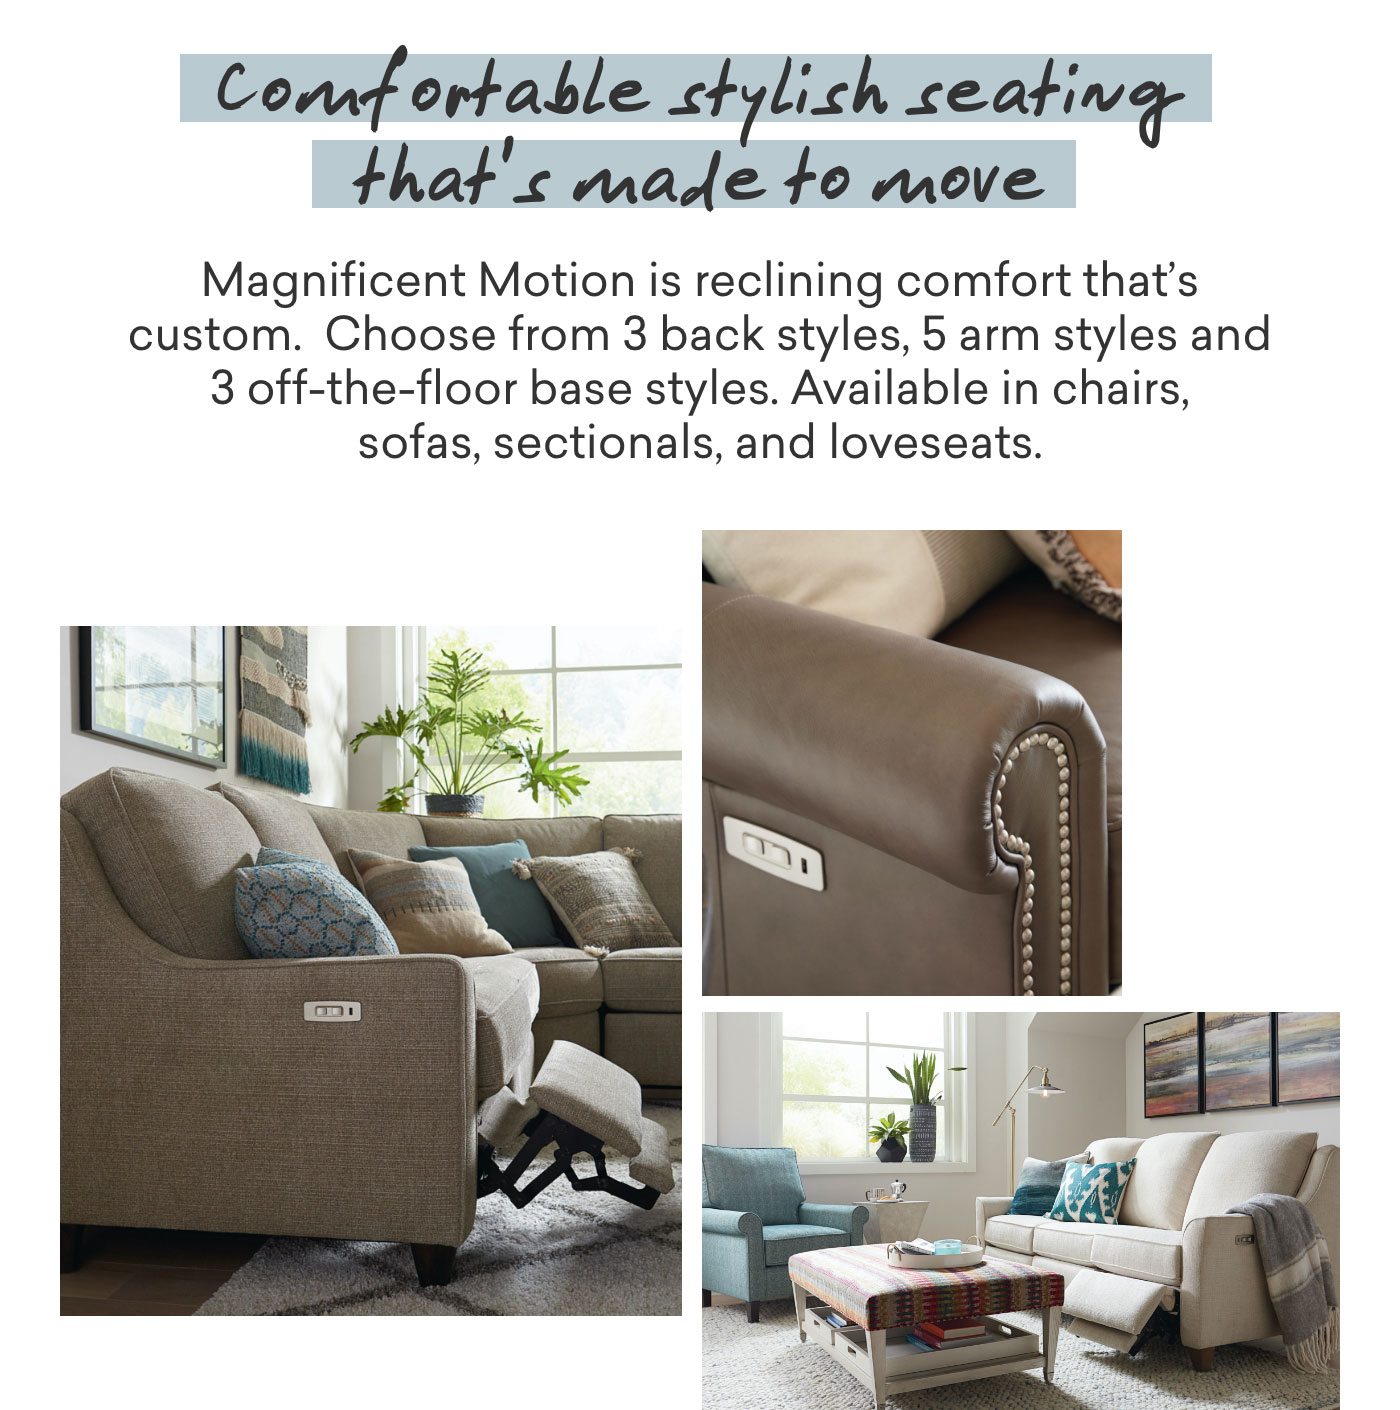 Comfortable stylish seating that's made to move. Magnificent Motion is reclining comfort that's custom. Choose from 3 back styles, 5 arm styles and 3 off-the-floor base styles. Available in chairs, sofas, sectionals and loveseats.